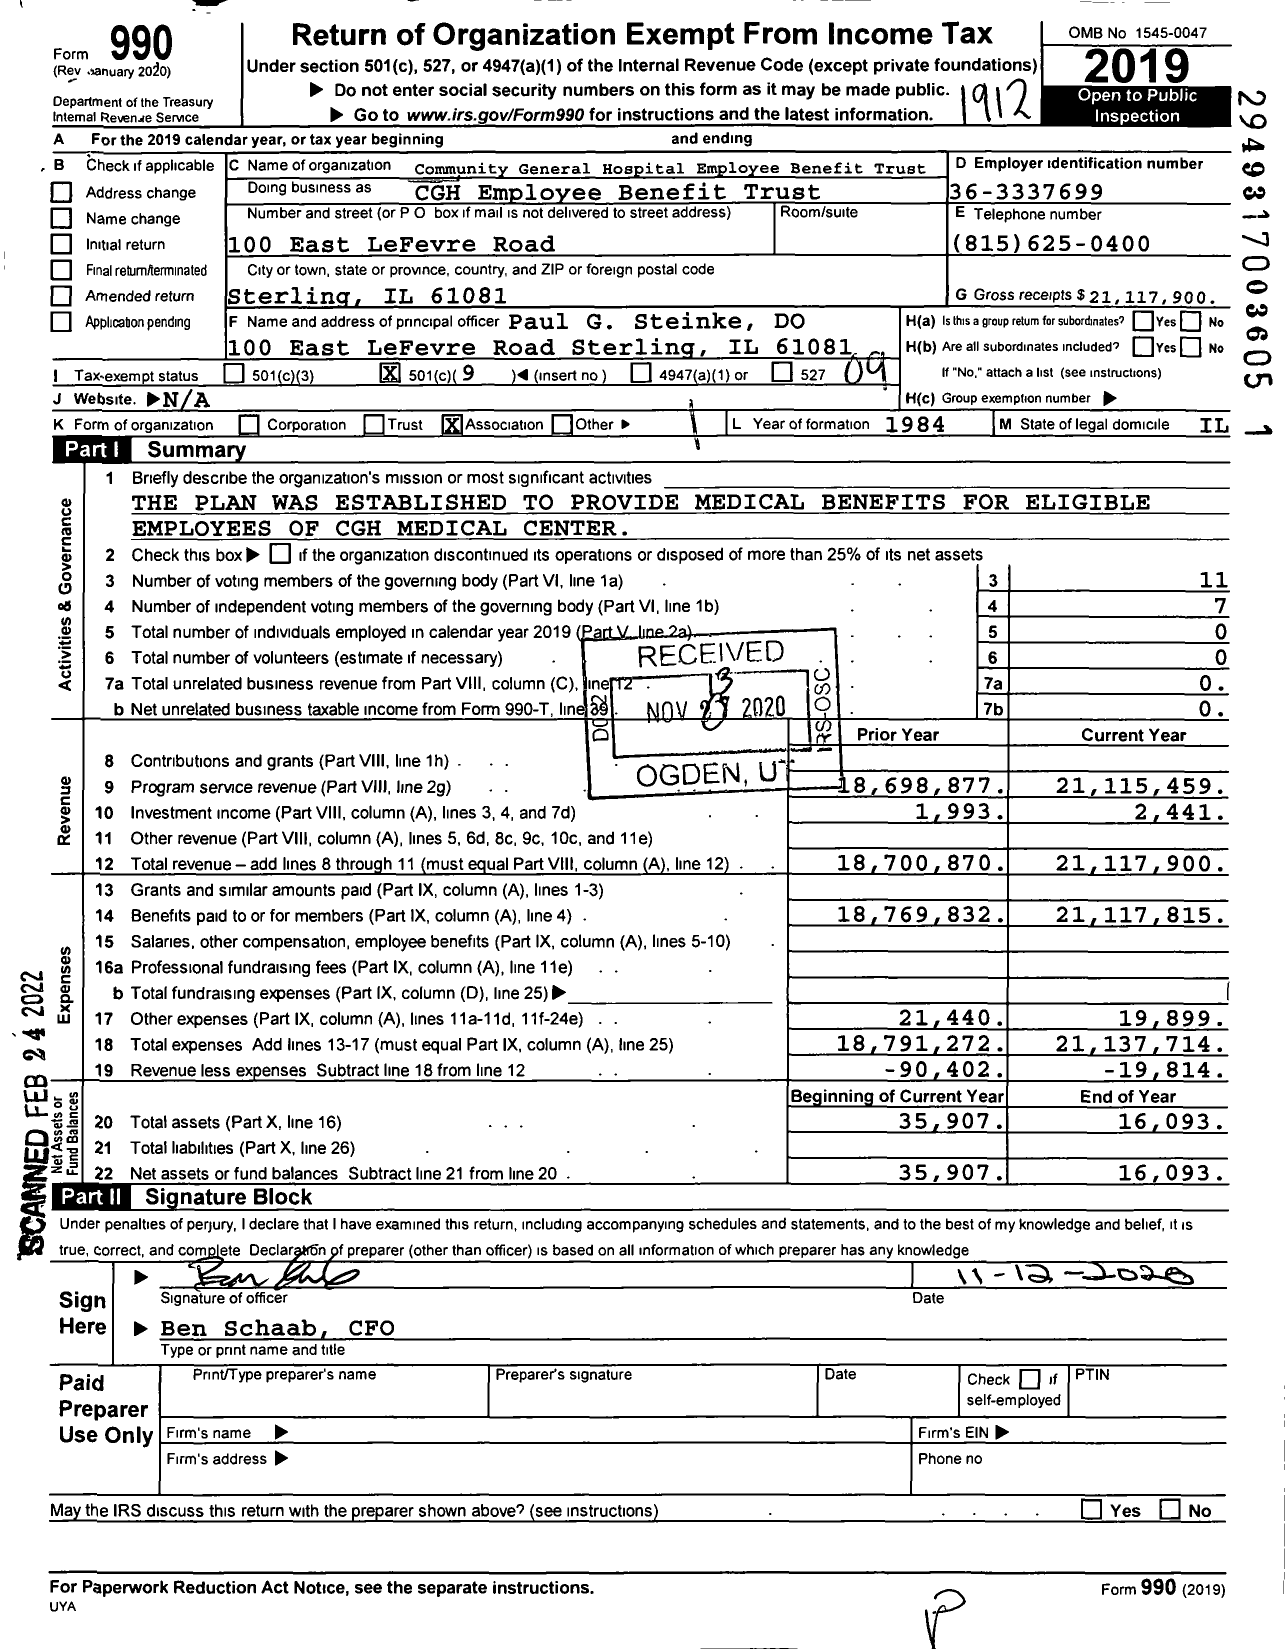 Image of first page of 2019 Form 990O for Community General Hospital Employee Benefit Trust CGH Employee Benefit Trust